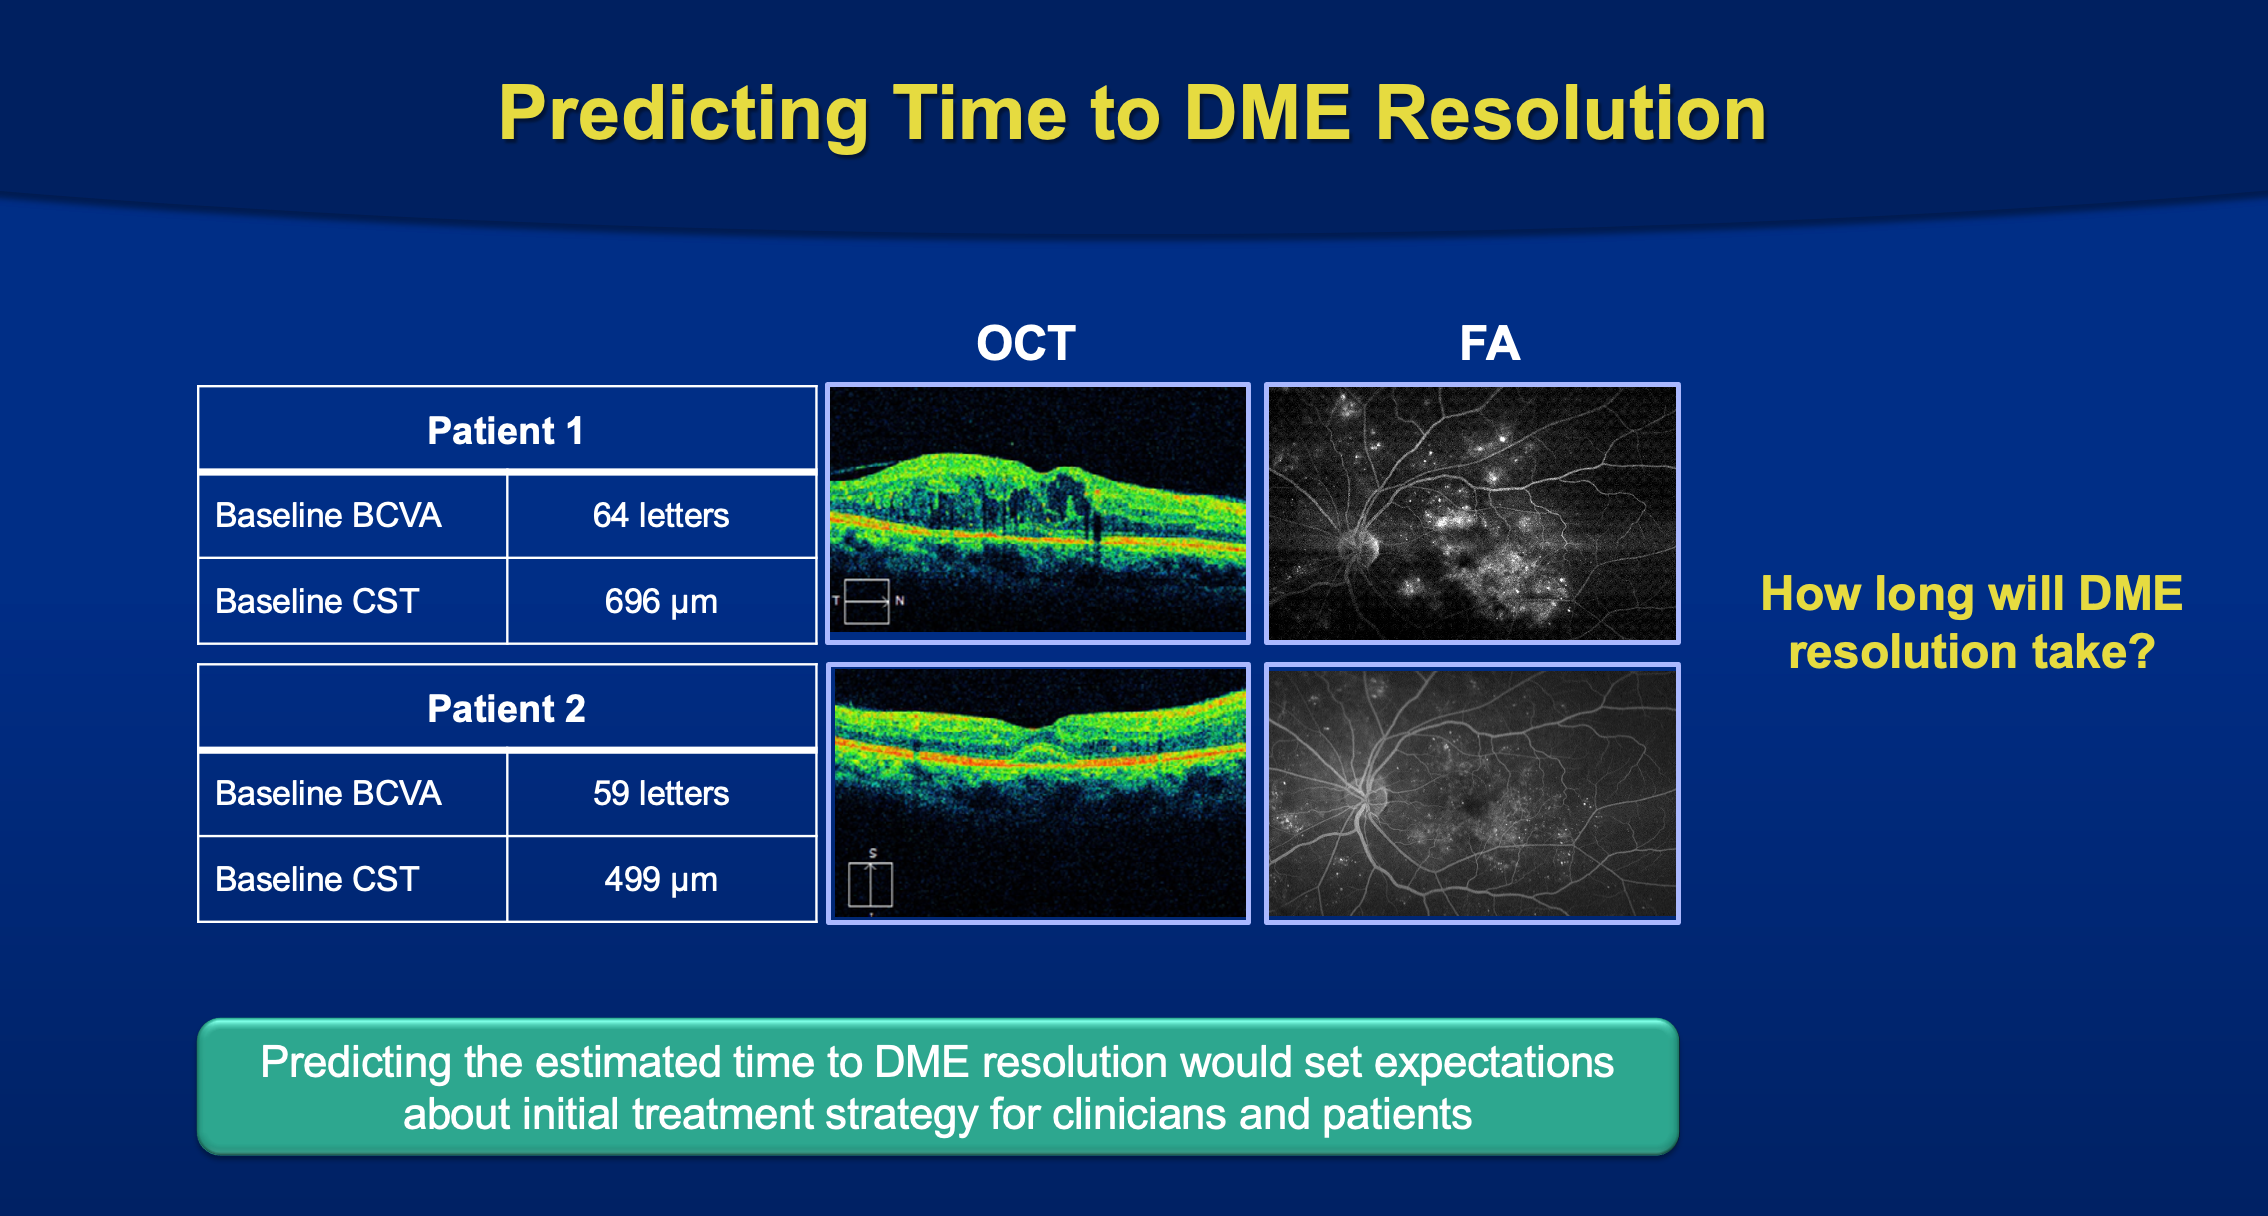 Determining the time to DME resolution with intravitreal aflibercept